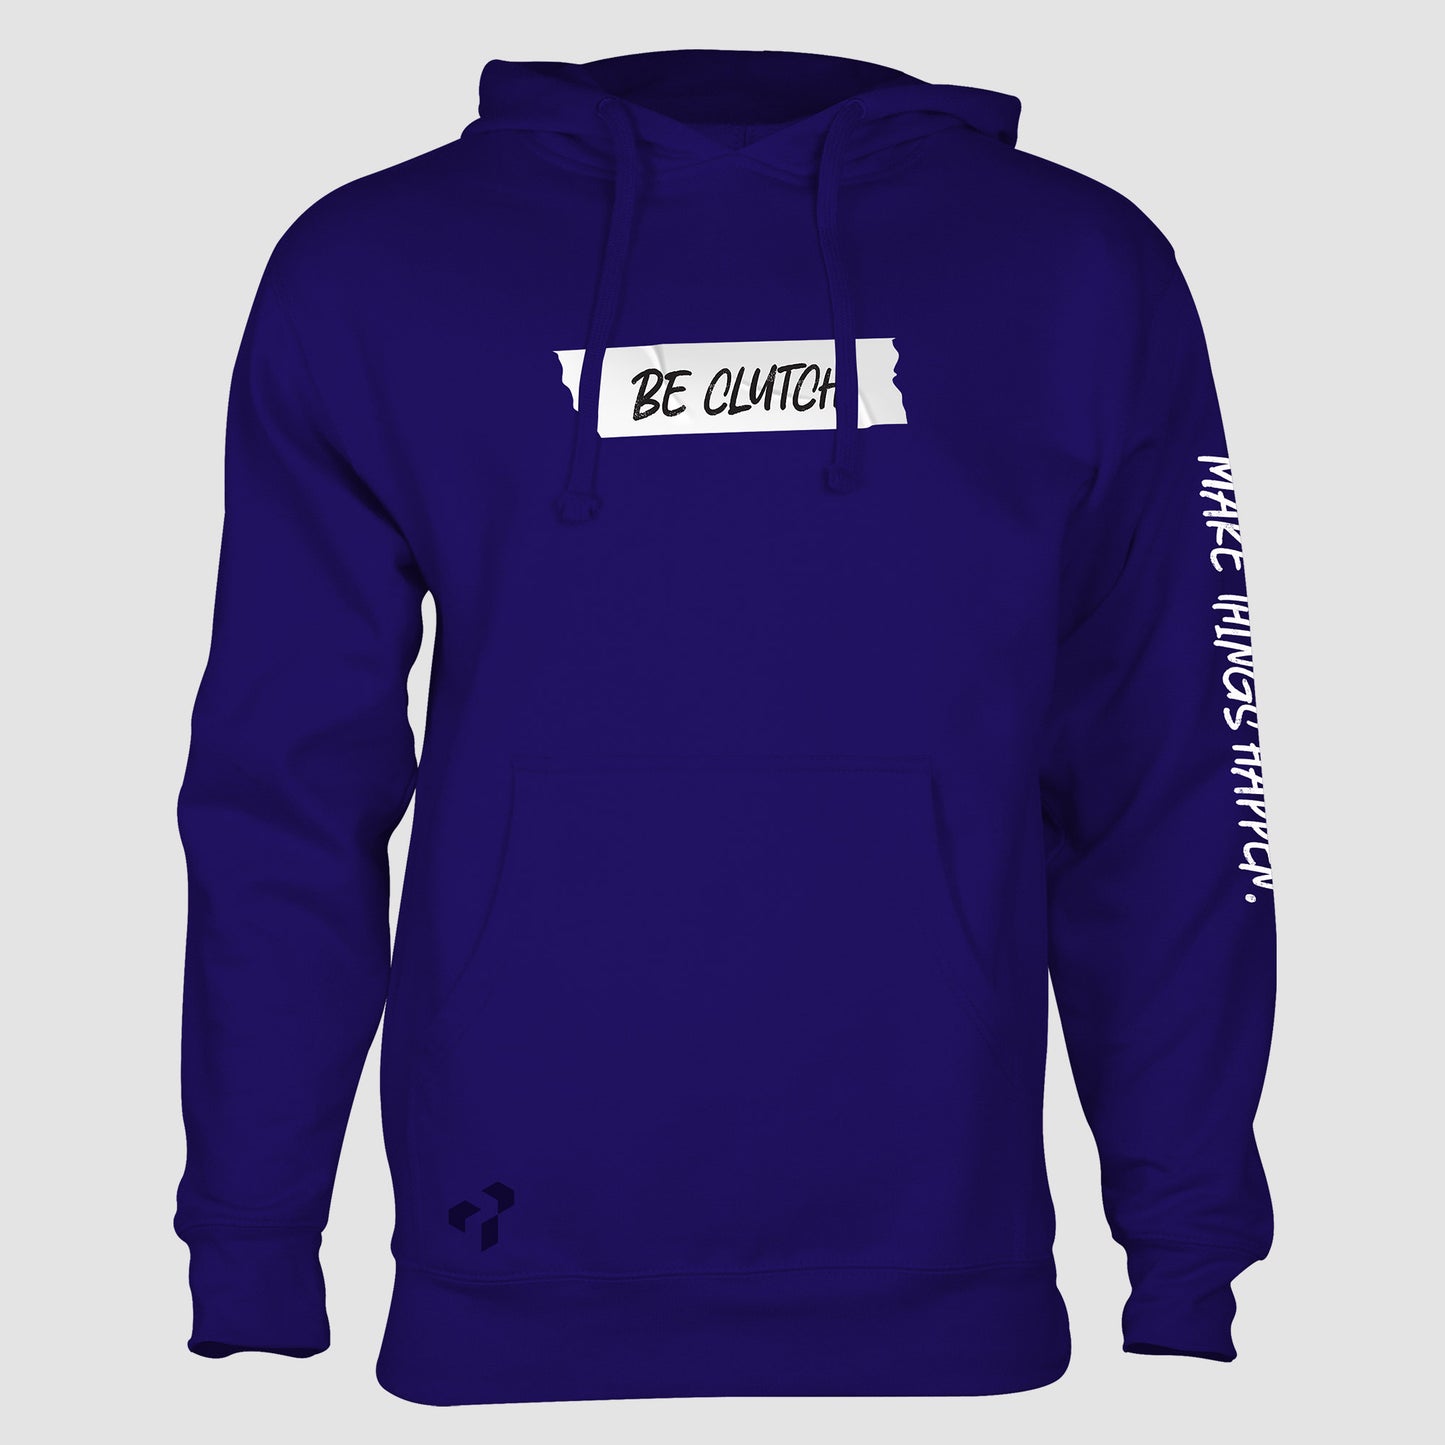 Be Clutch Heavyweight Pullover Hoodie